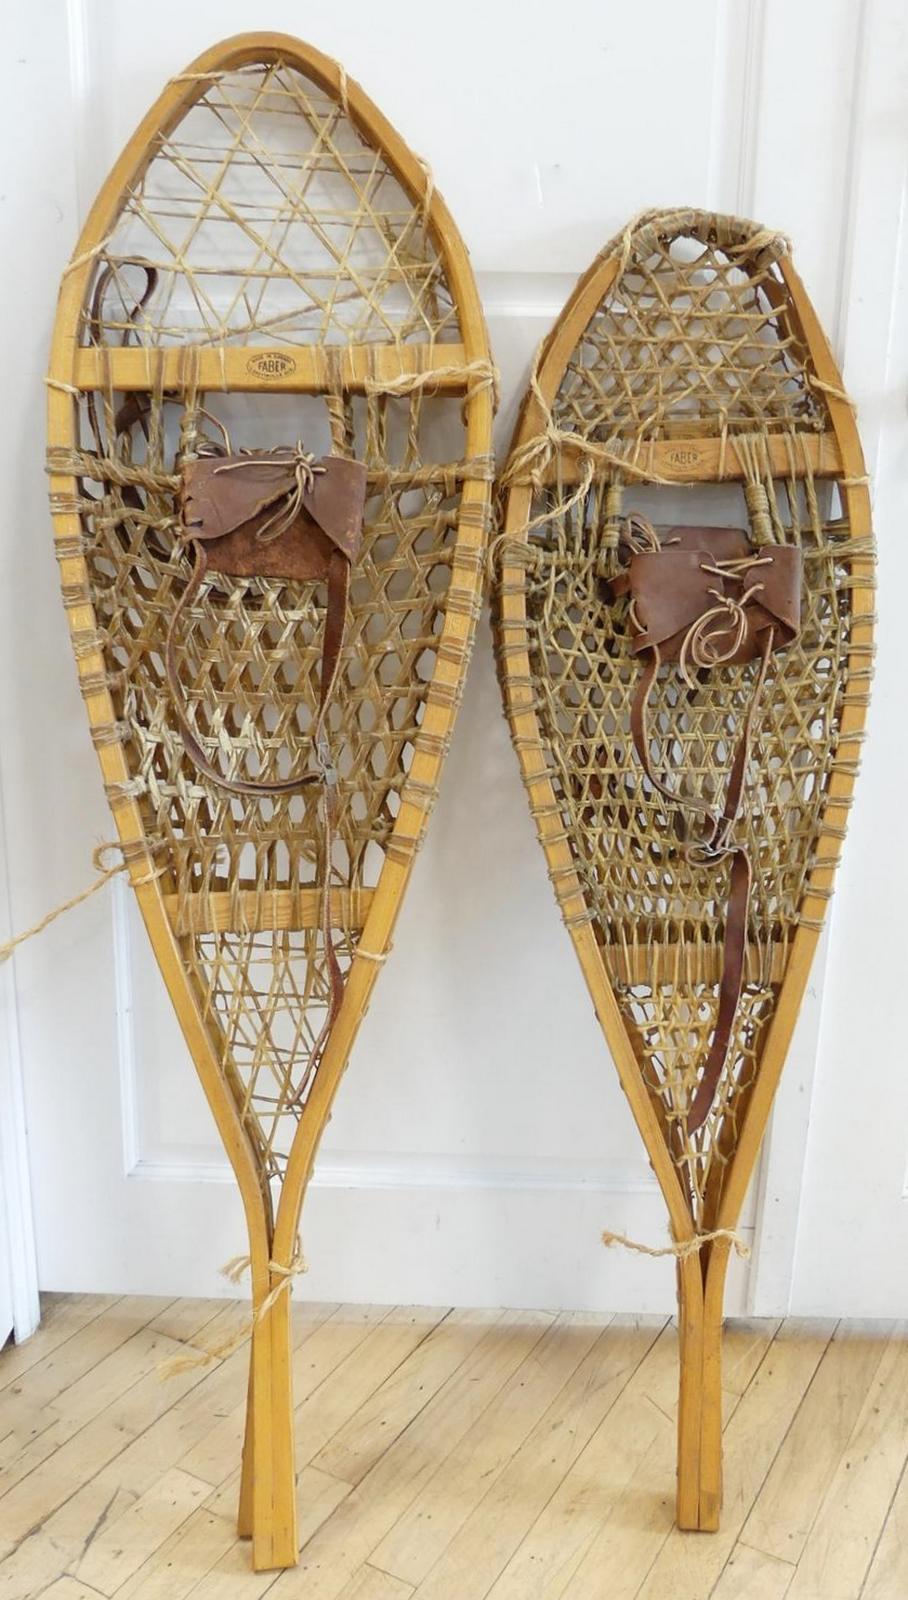 TWO PAIRS SNOWSHOES